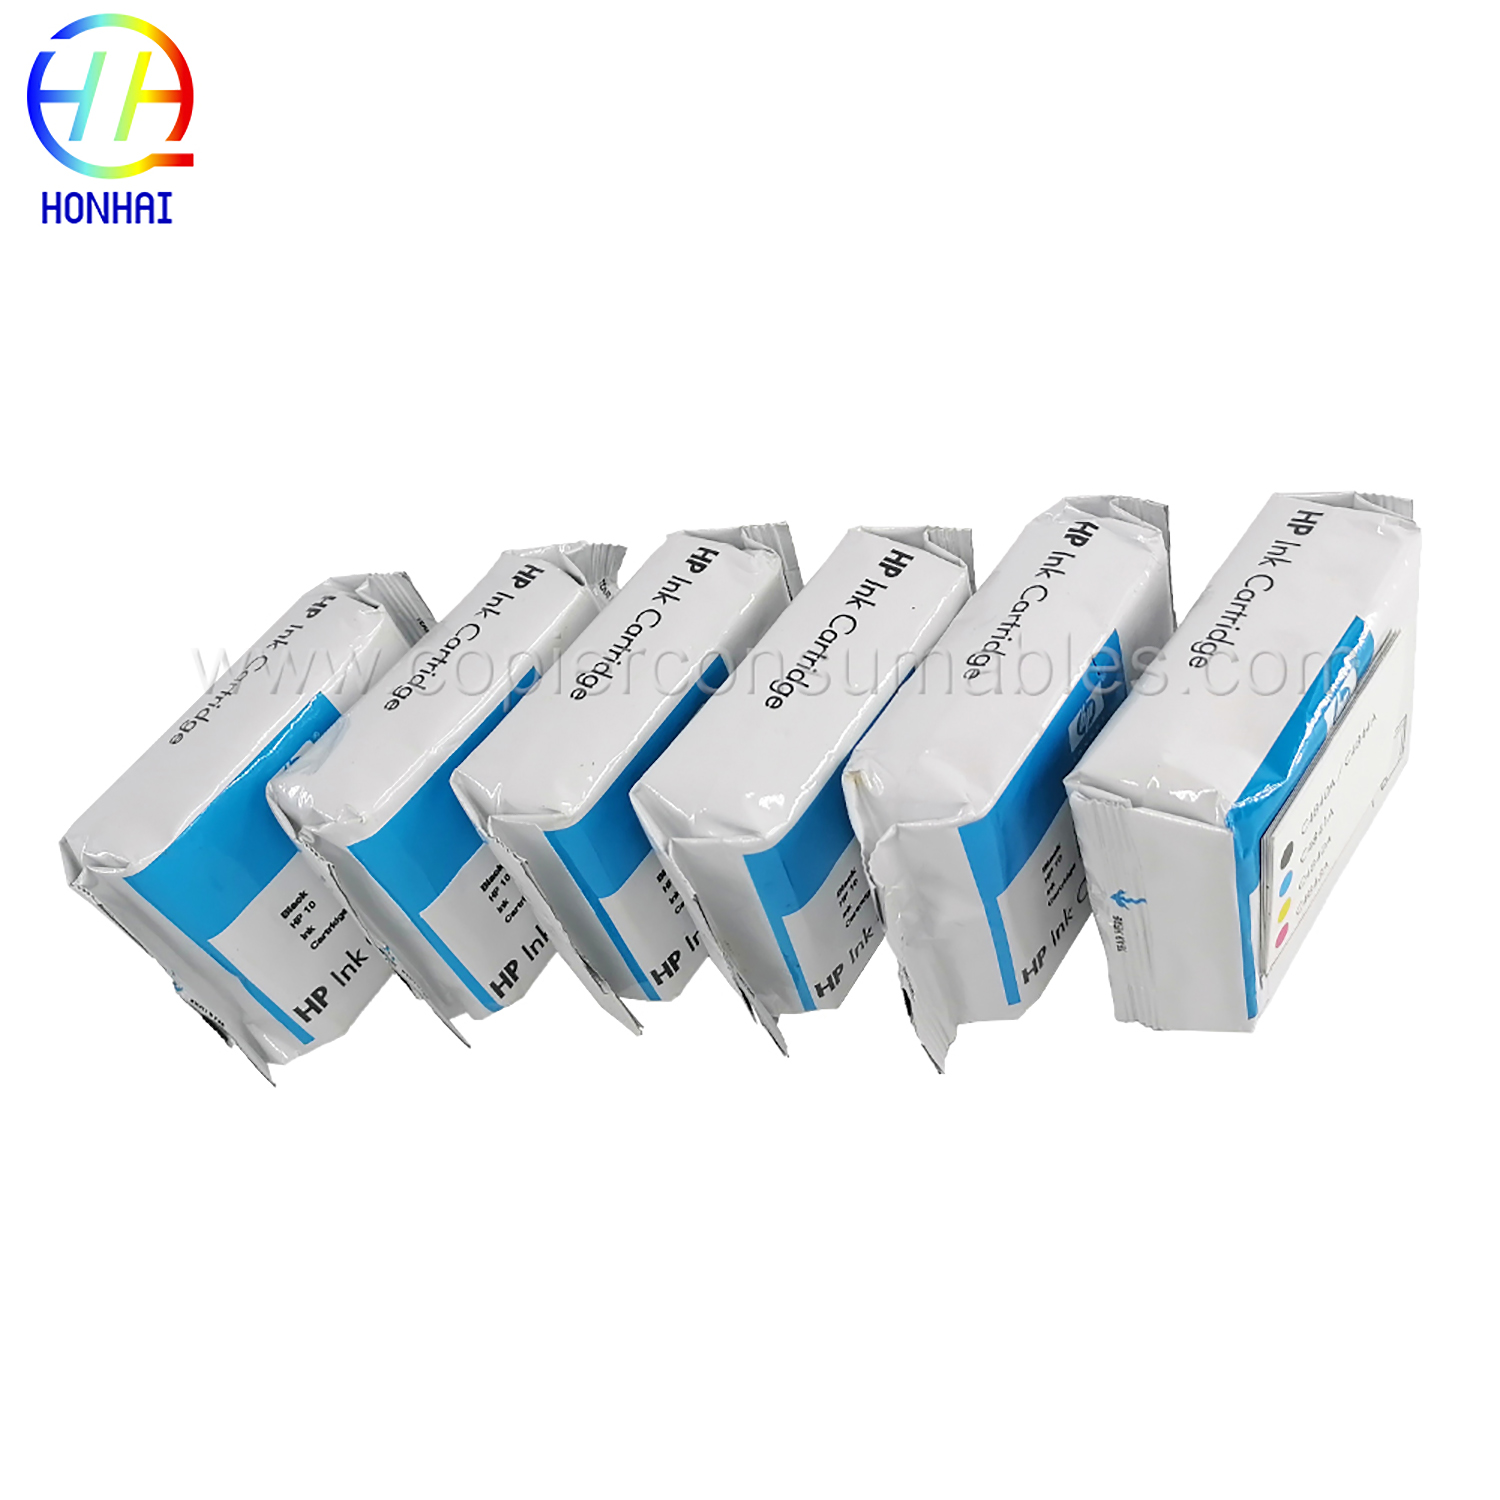 Ink Cartridge Black for HP 10 C4844A (4) 拷贝